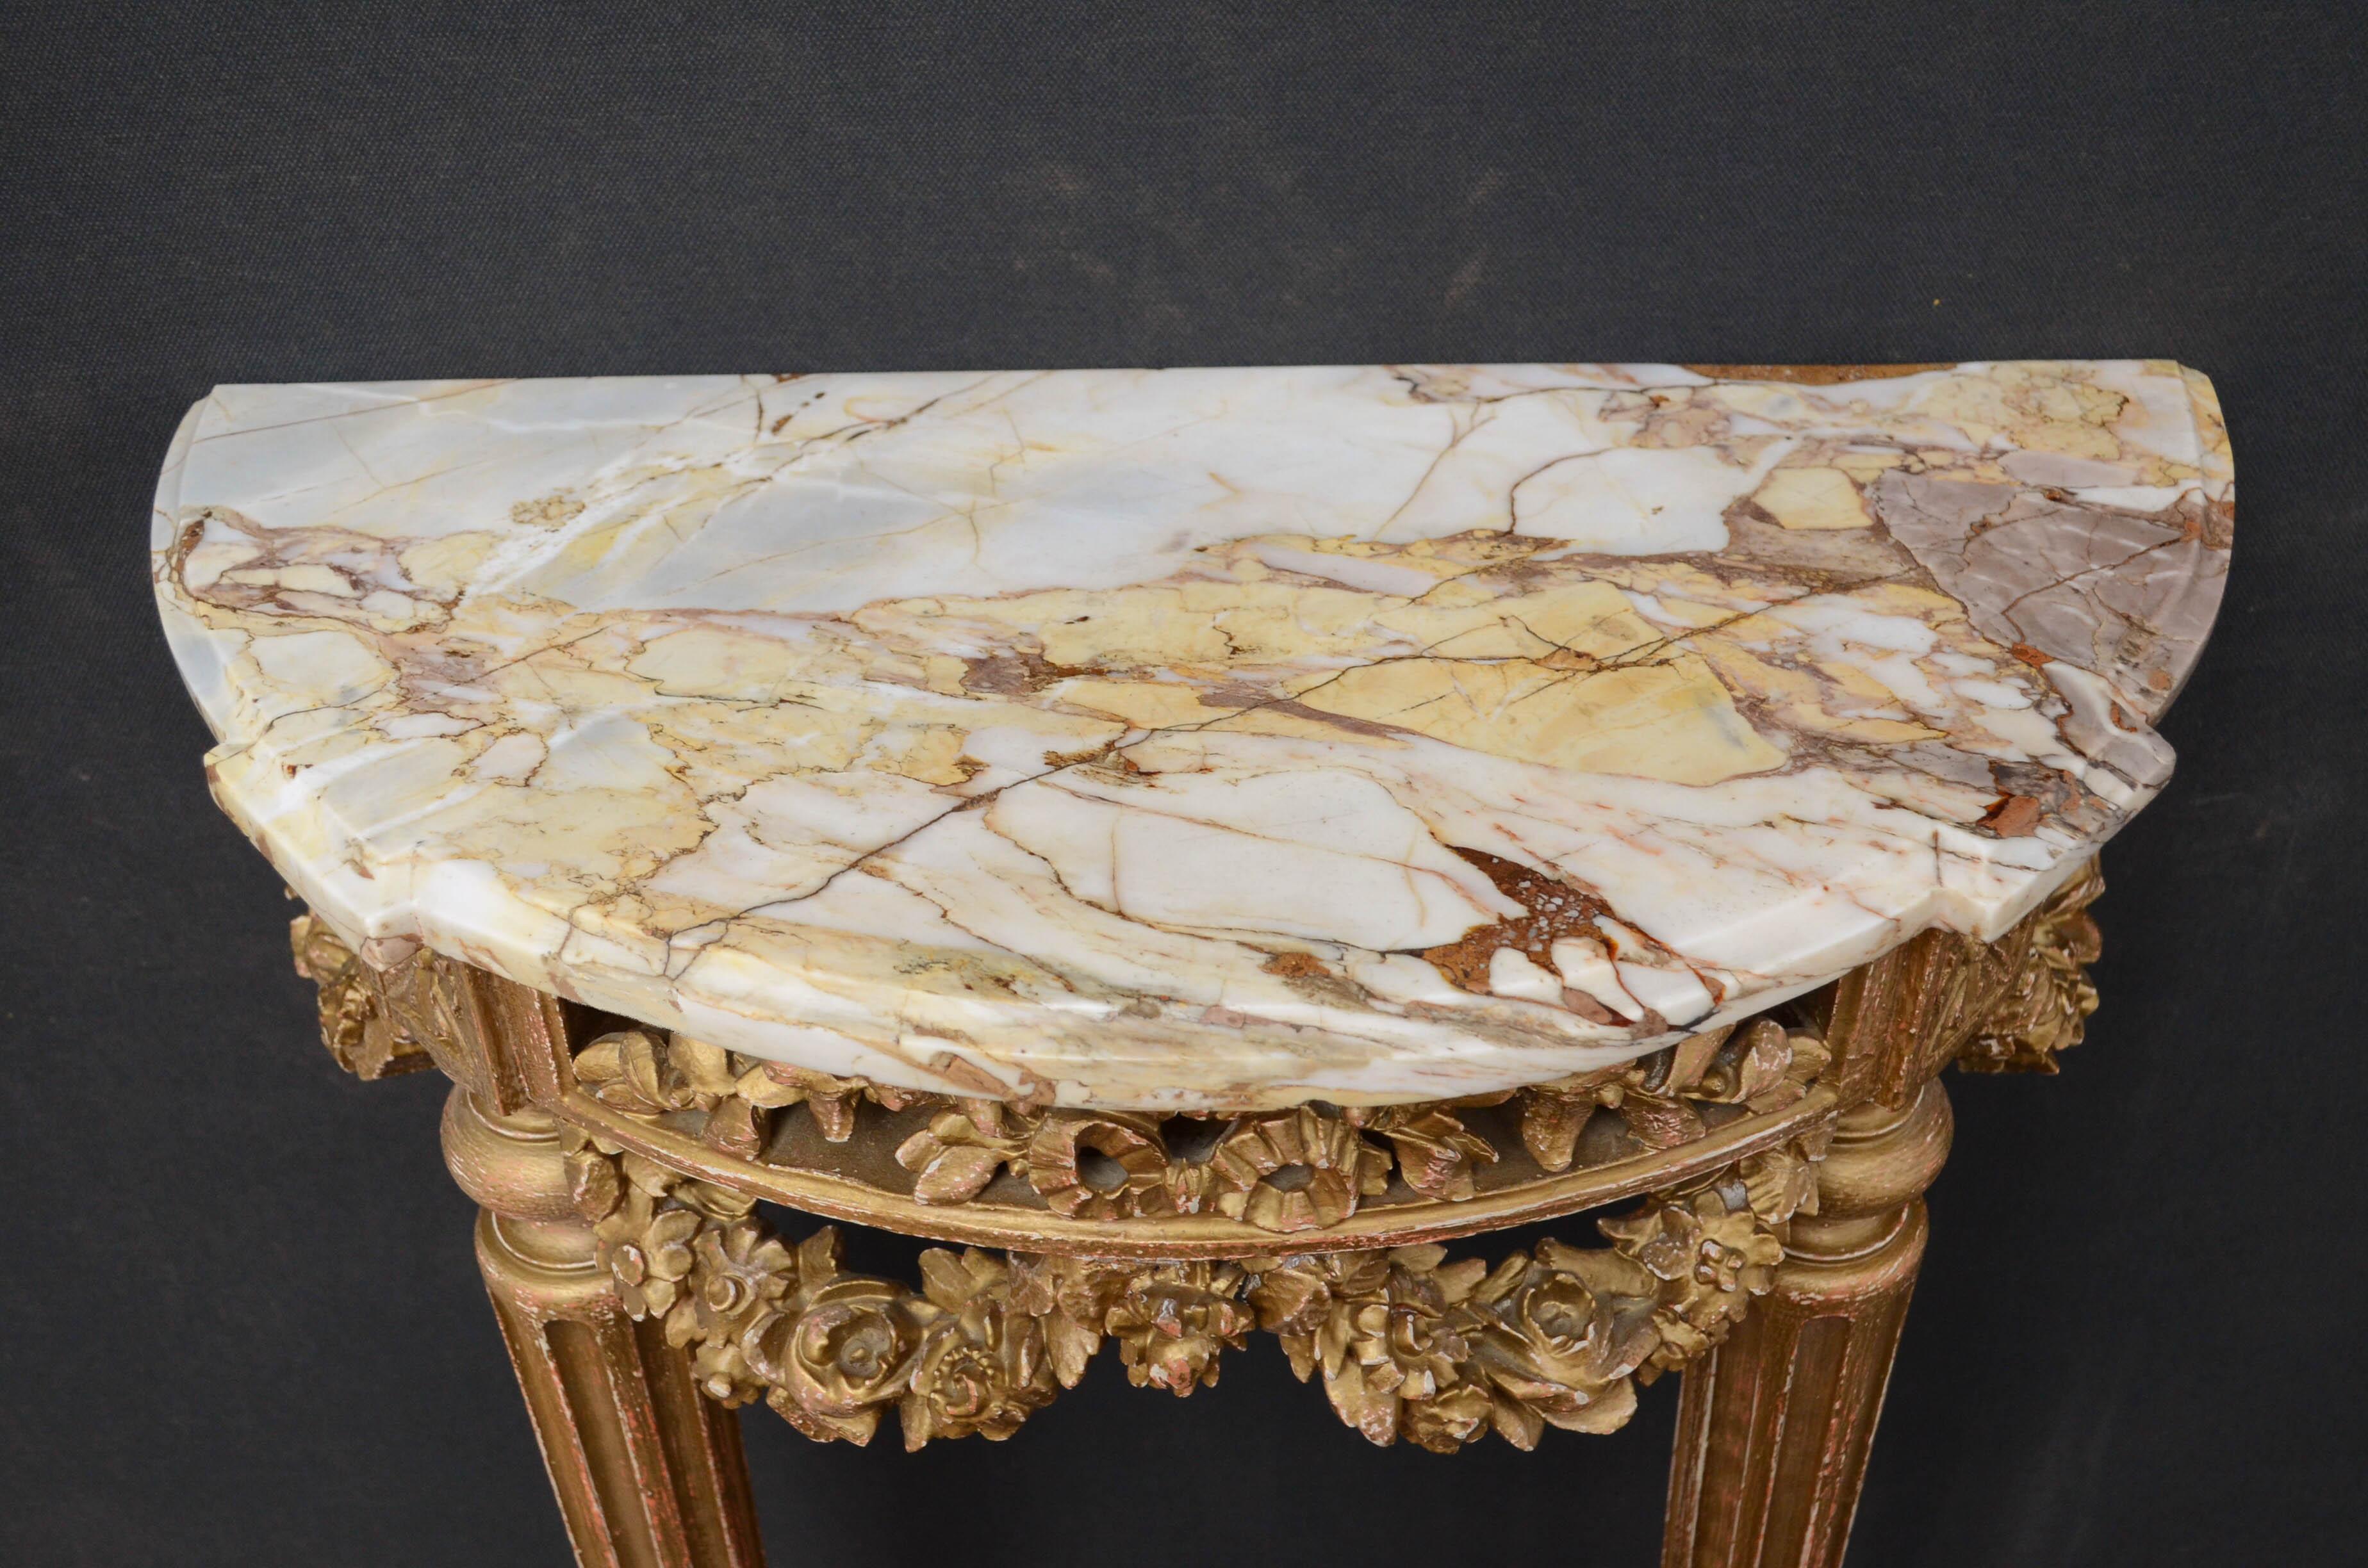 Sn4550 French painted hall table with original veined marble, carved frieze and swags, standing on turned, reeded legs united by carved stretcher, circa 1930
Measures: H 34